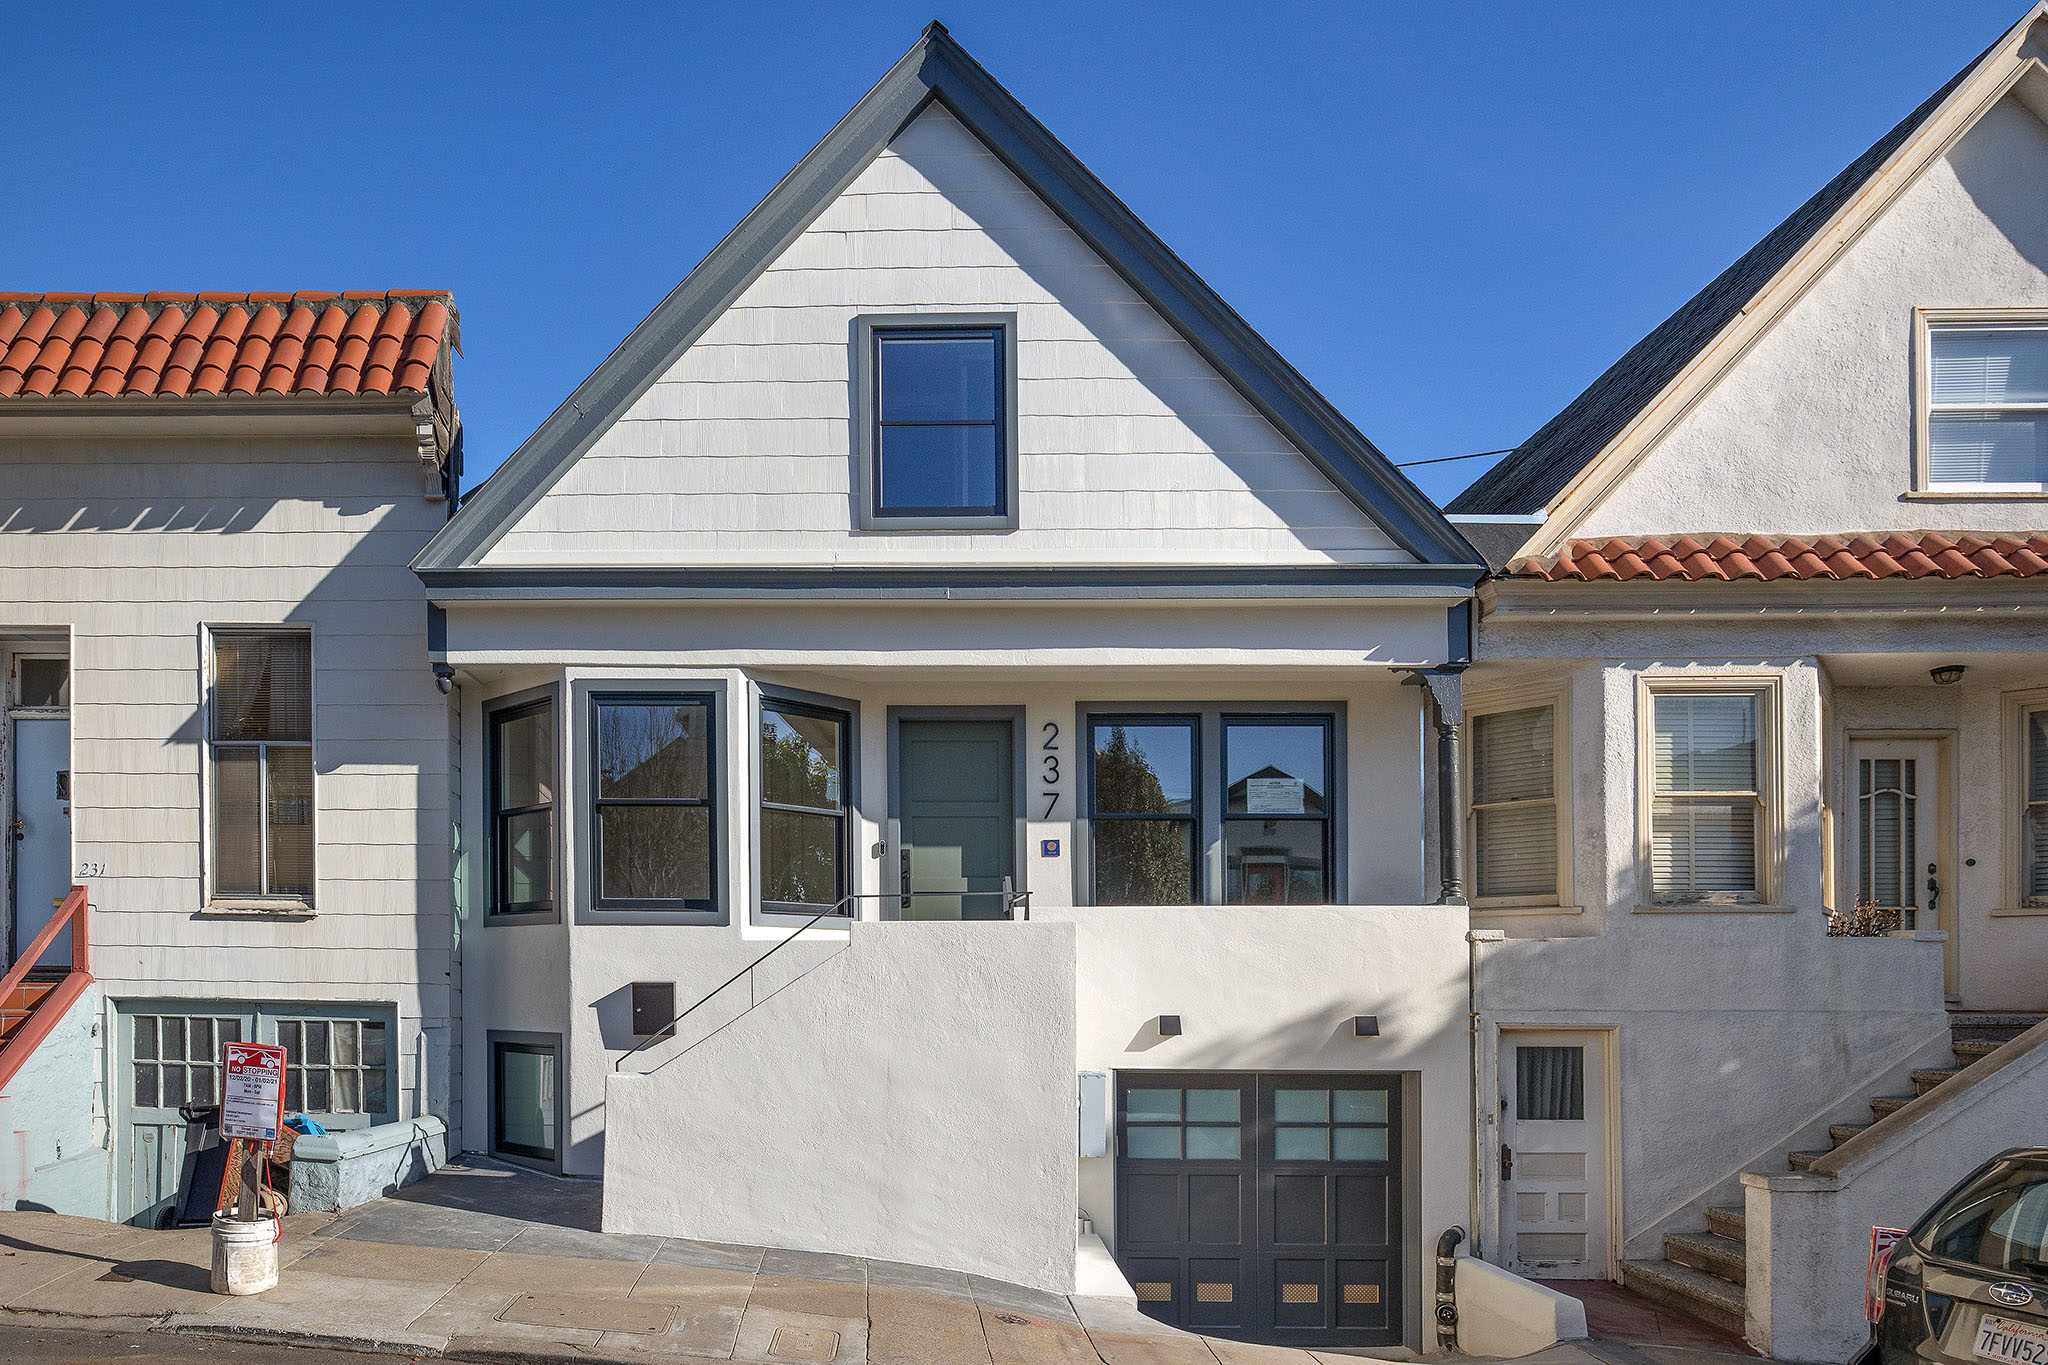 Feature photo for 237 Ellsworth St, San Francisco